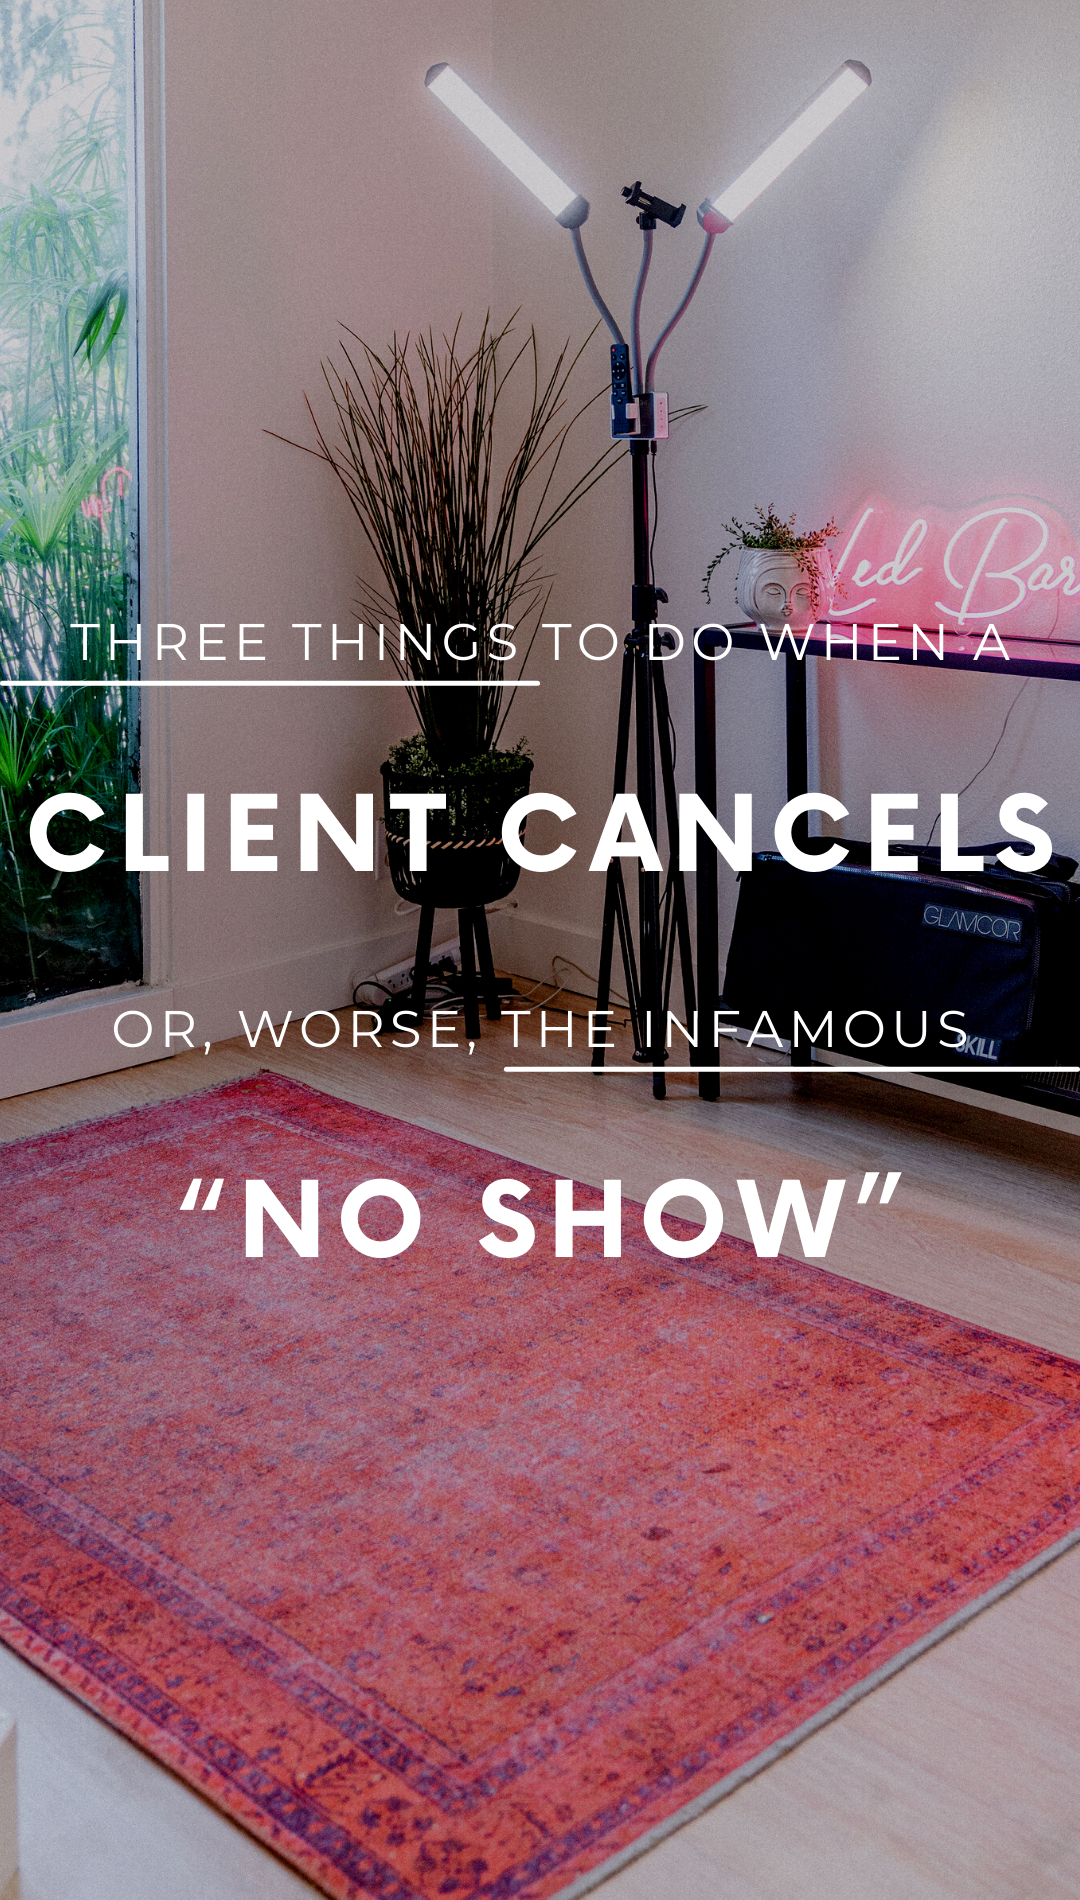 Three Things To Do When a Client Cancels or, WORSE, the infamous “No Show”